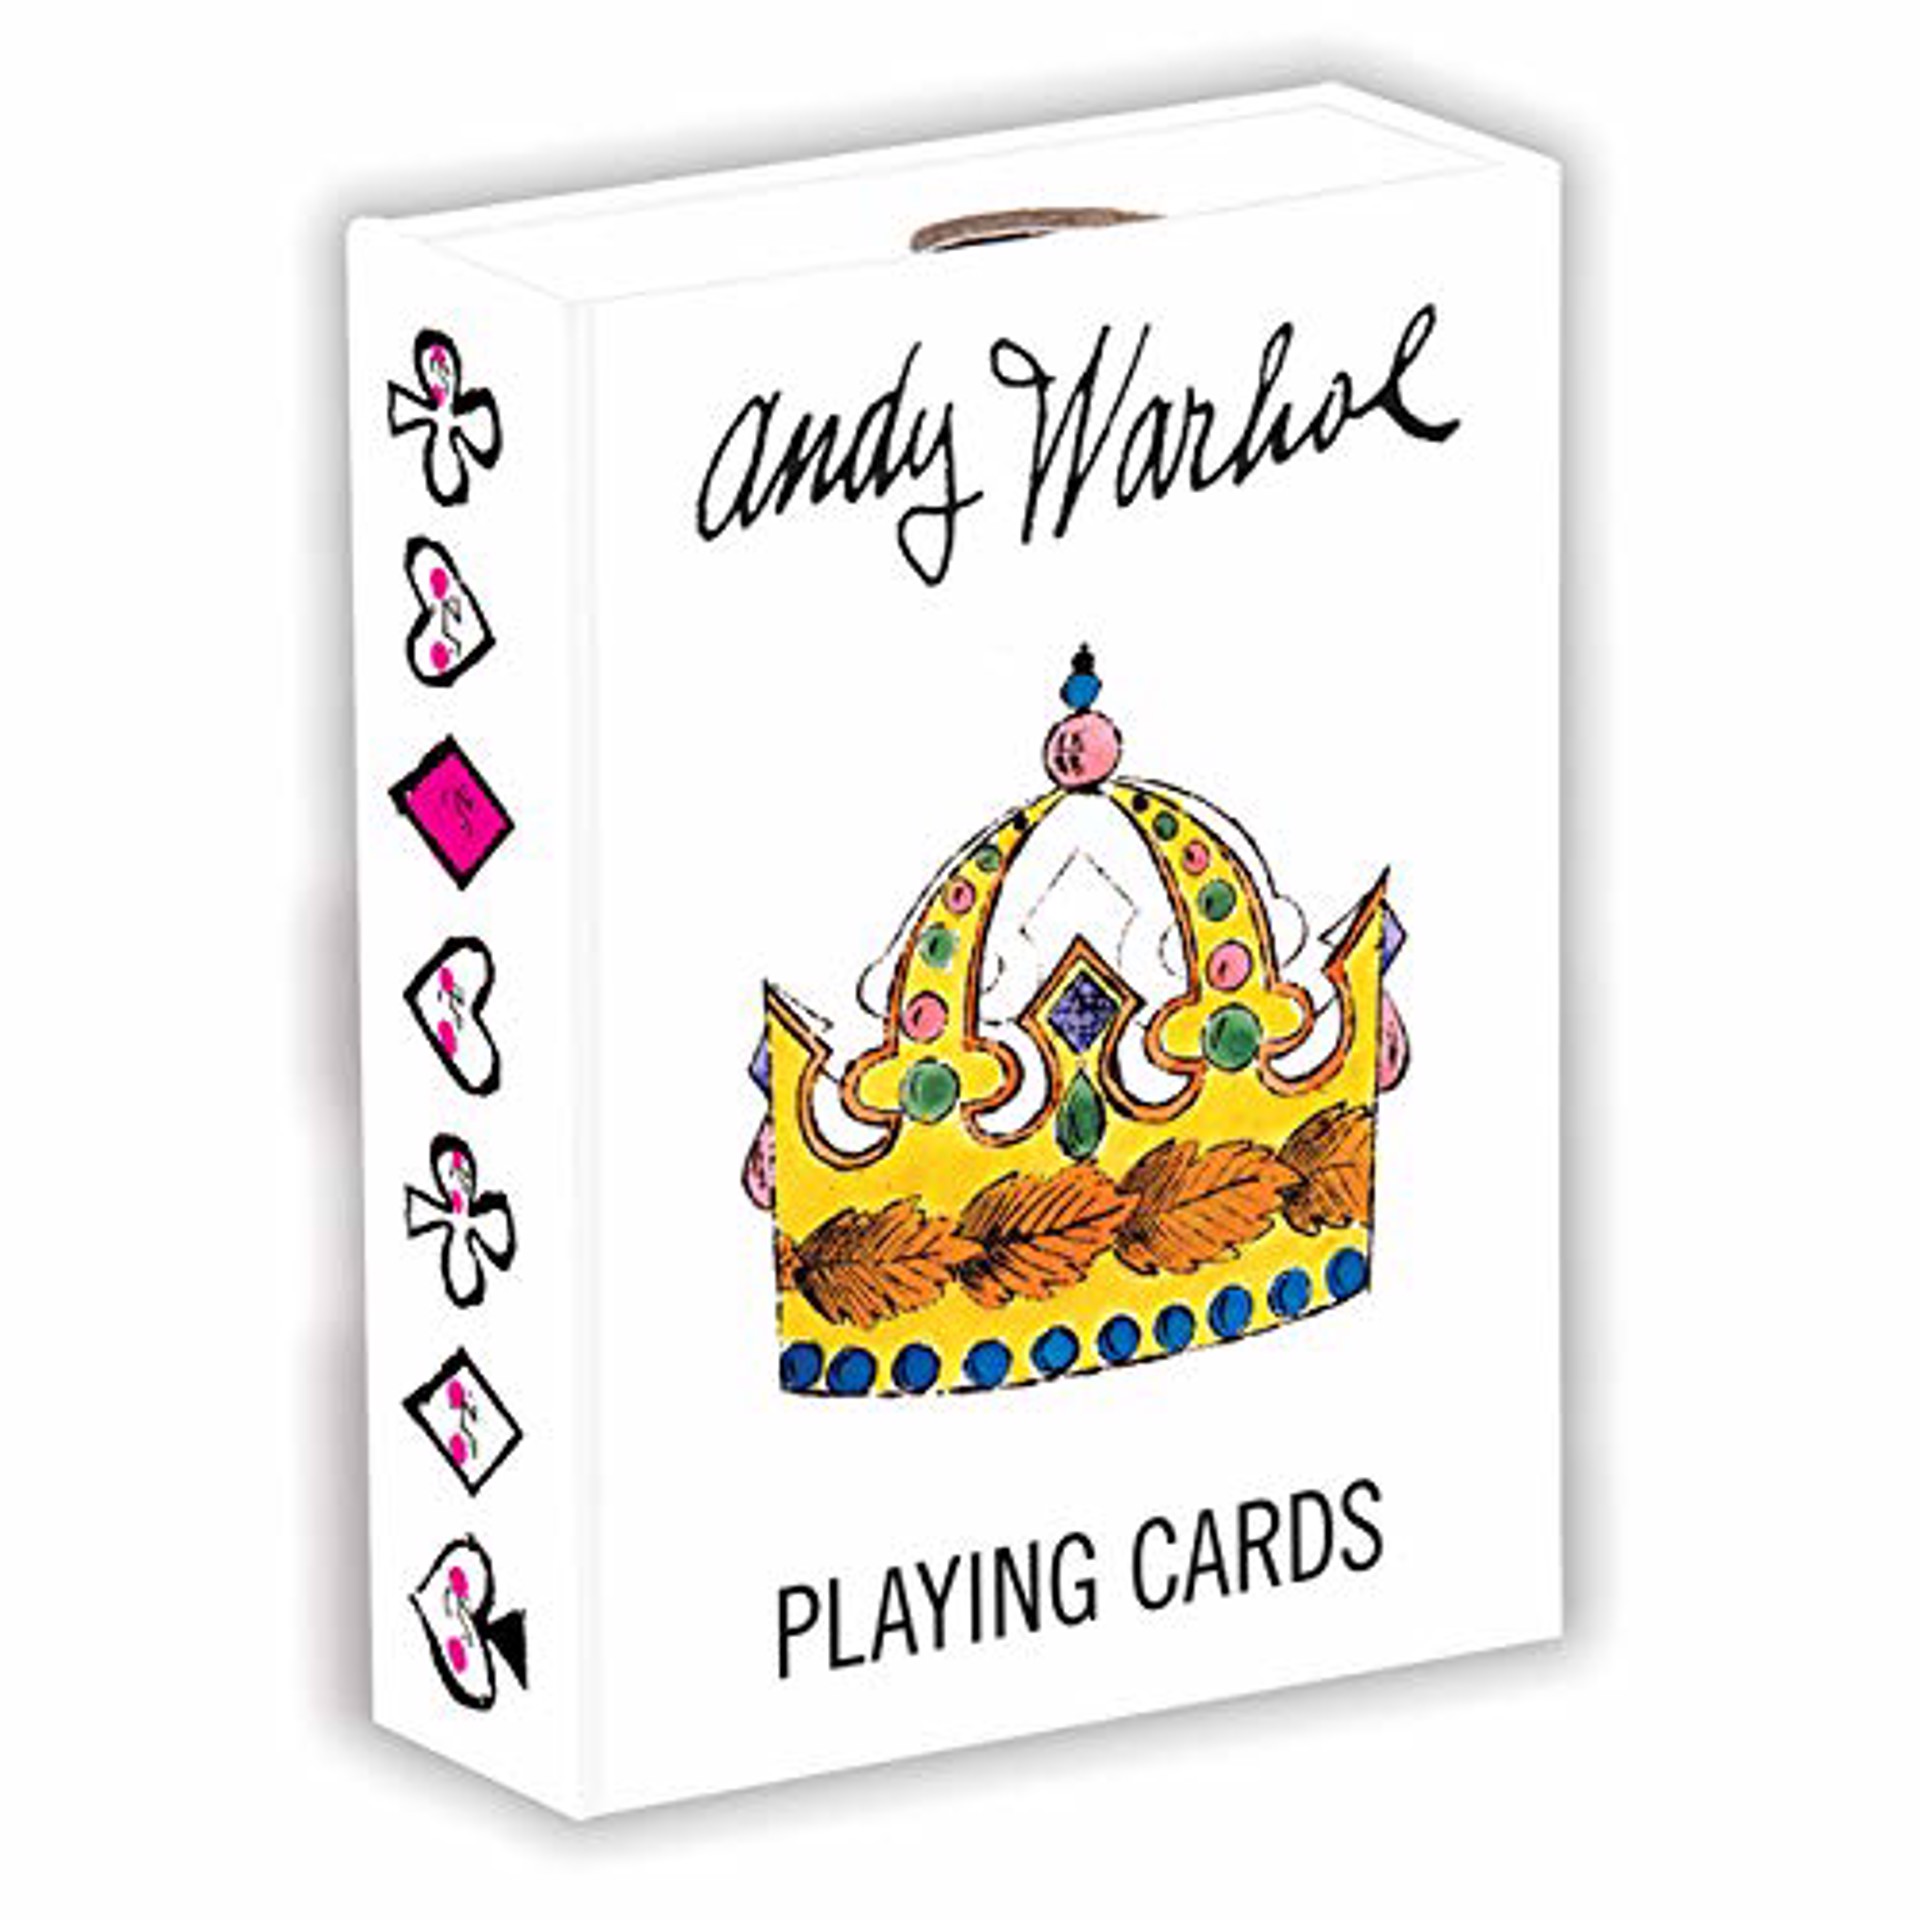 Playing Cards by Andy Warhol